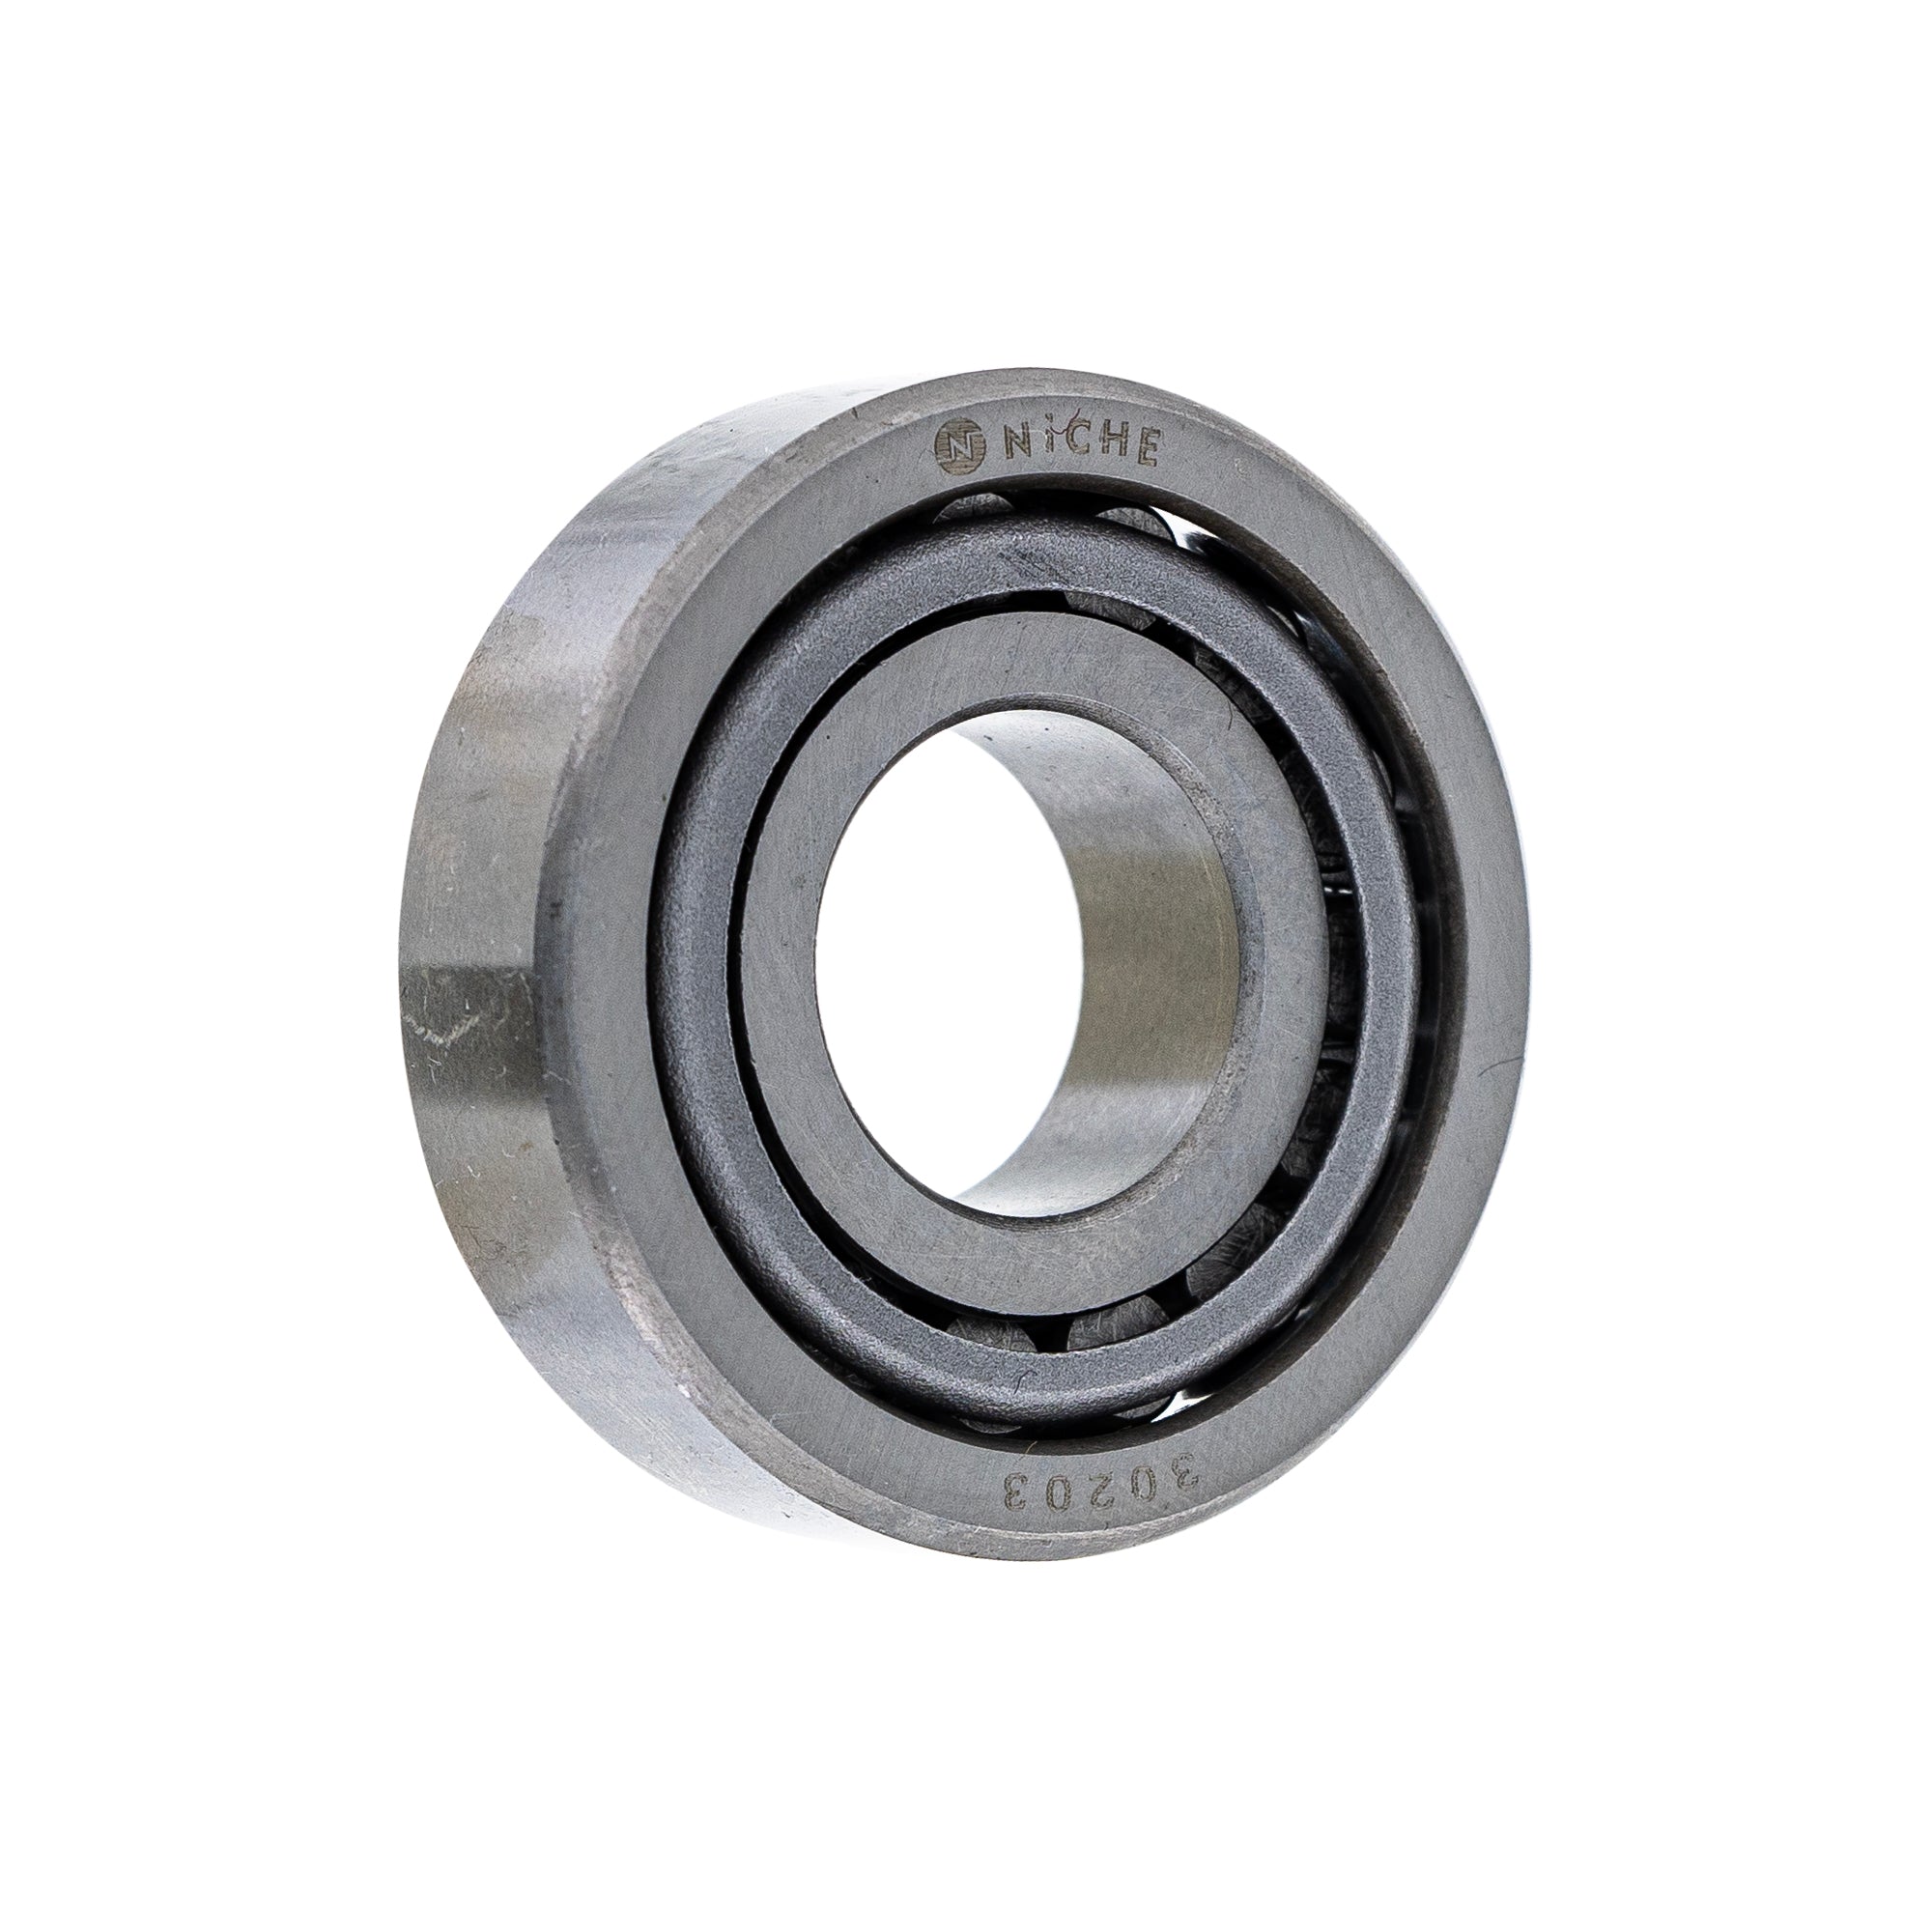 Tapered Roller Bearing for zOTHER R90S R90 R80ST R80RT NICHE 519-CBB2323R